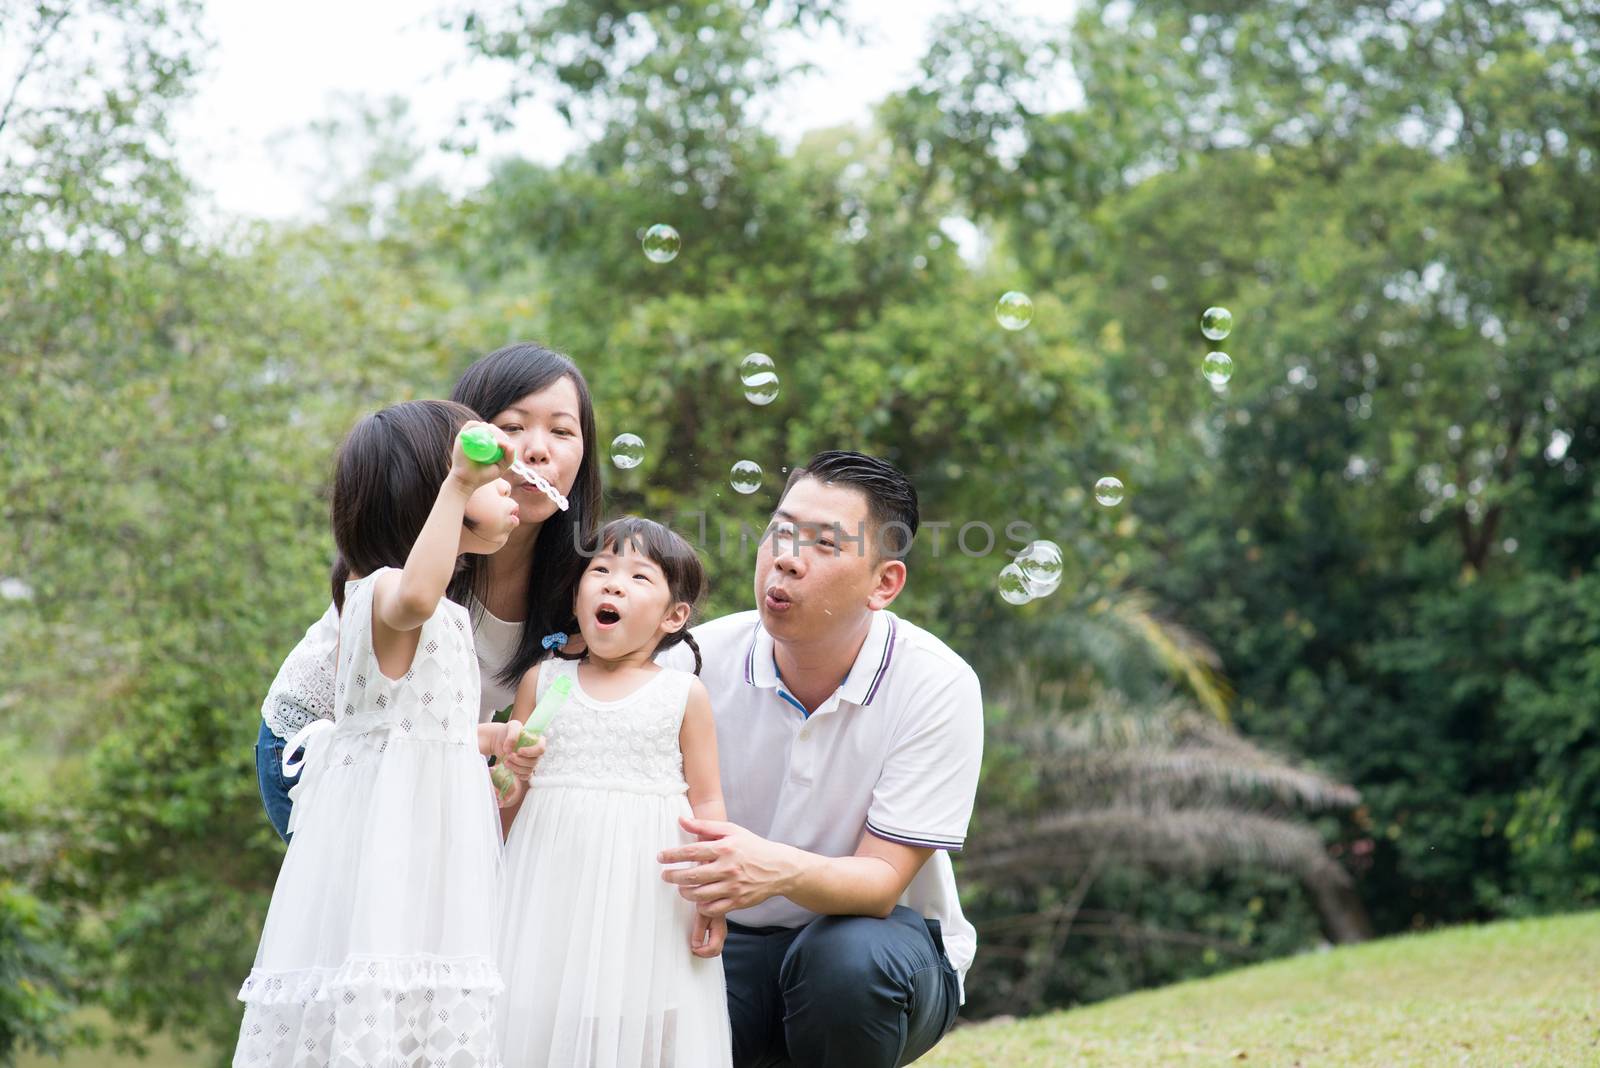 Family blowing soap bubbles outdoors by szefei